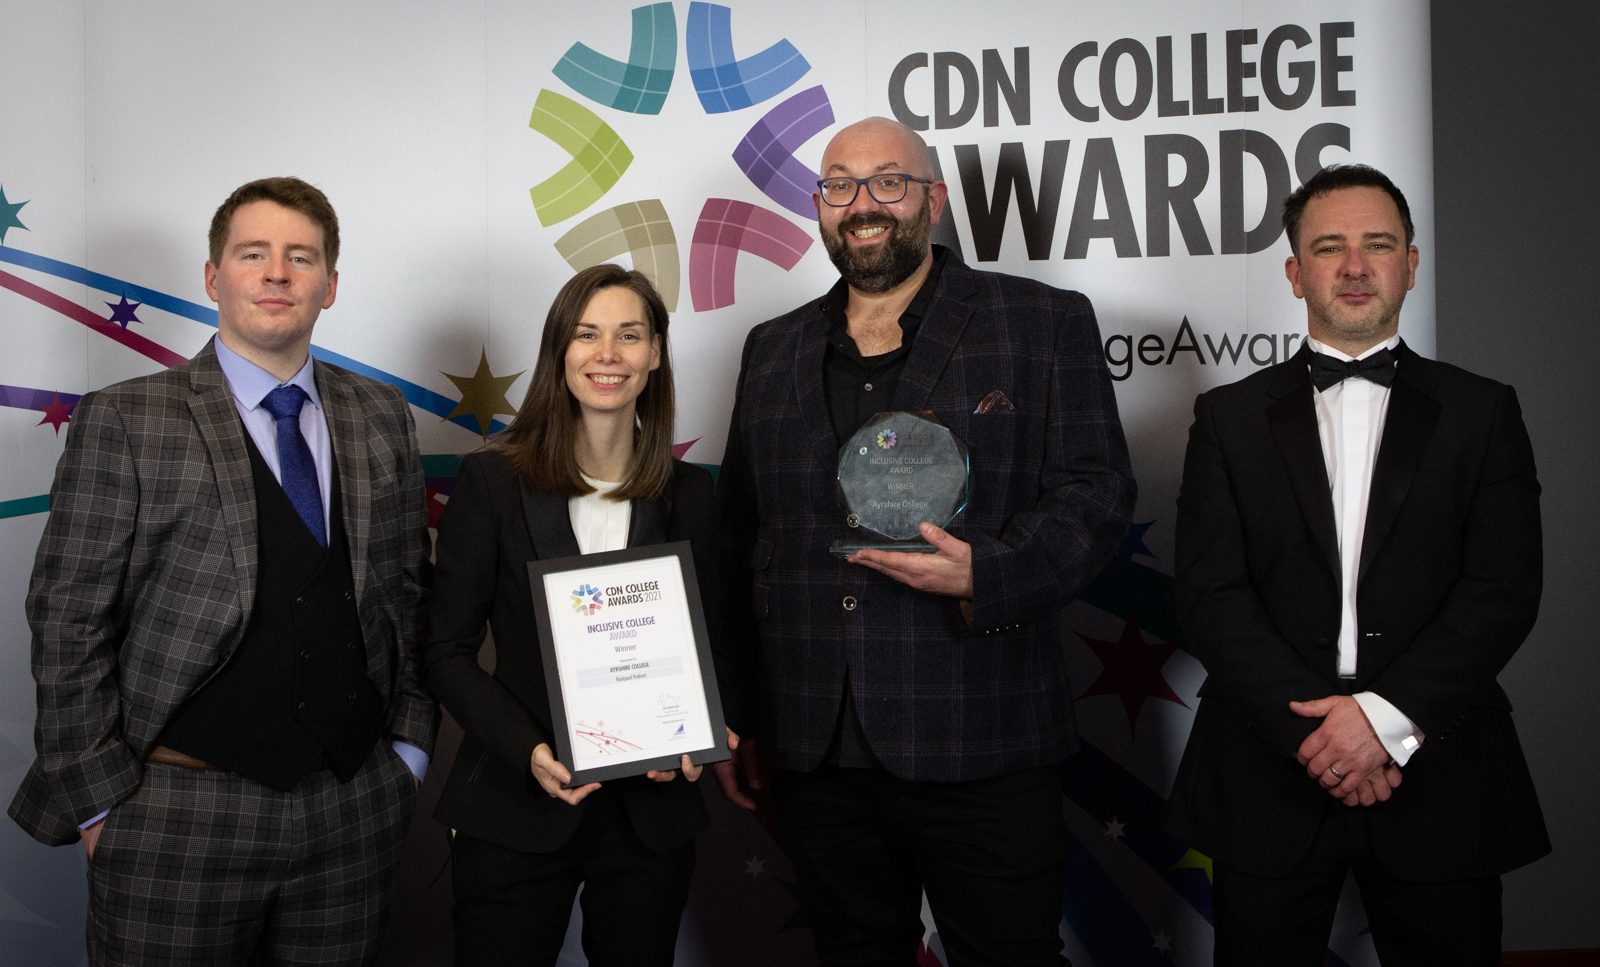 Successful night for Ayrshire College at CDN Awards